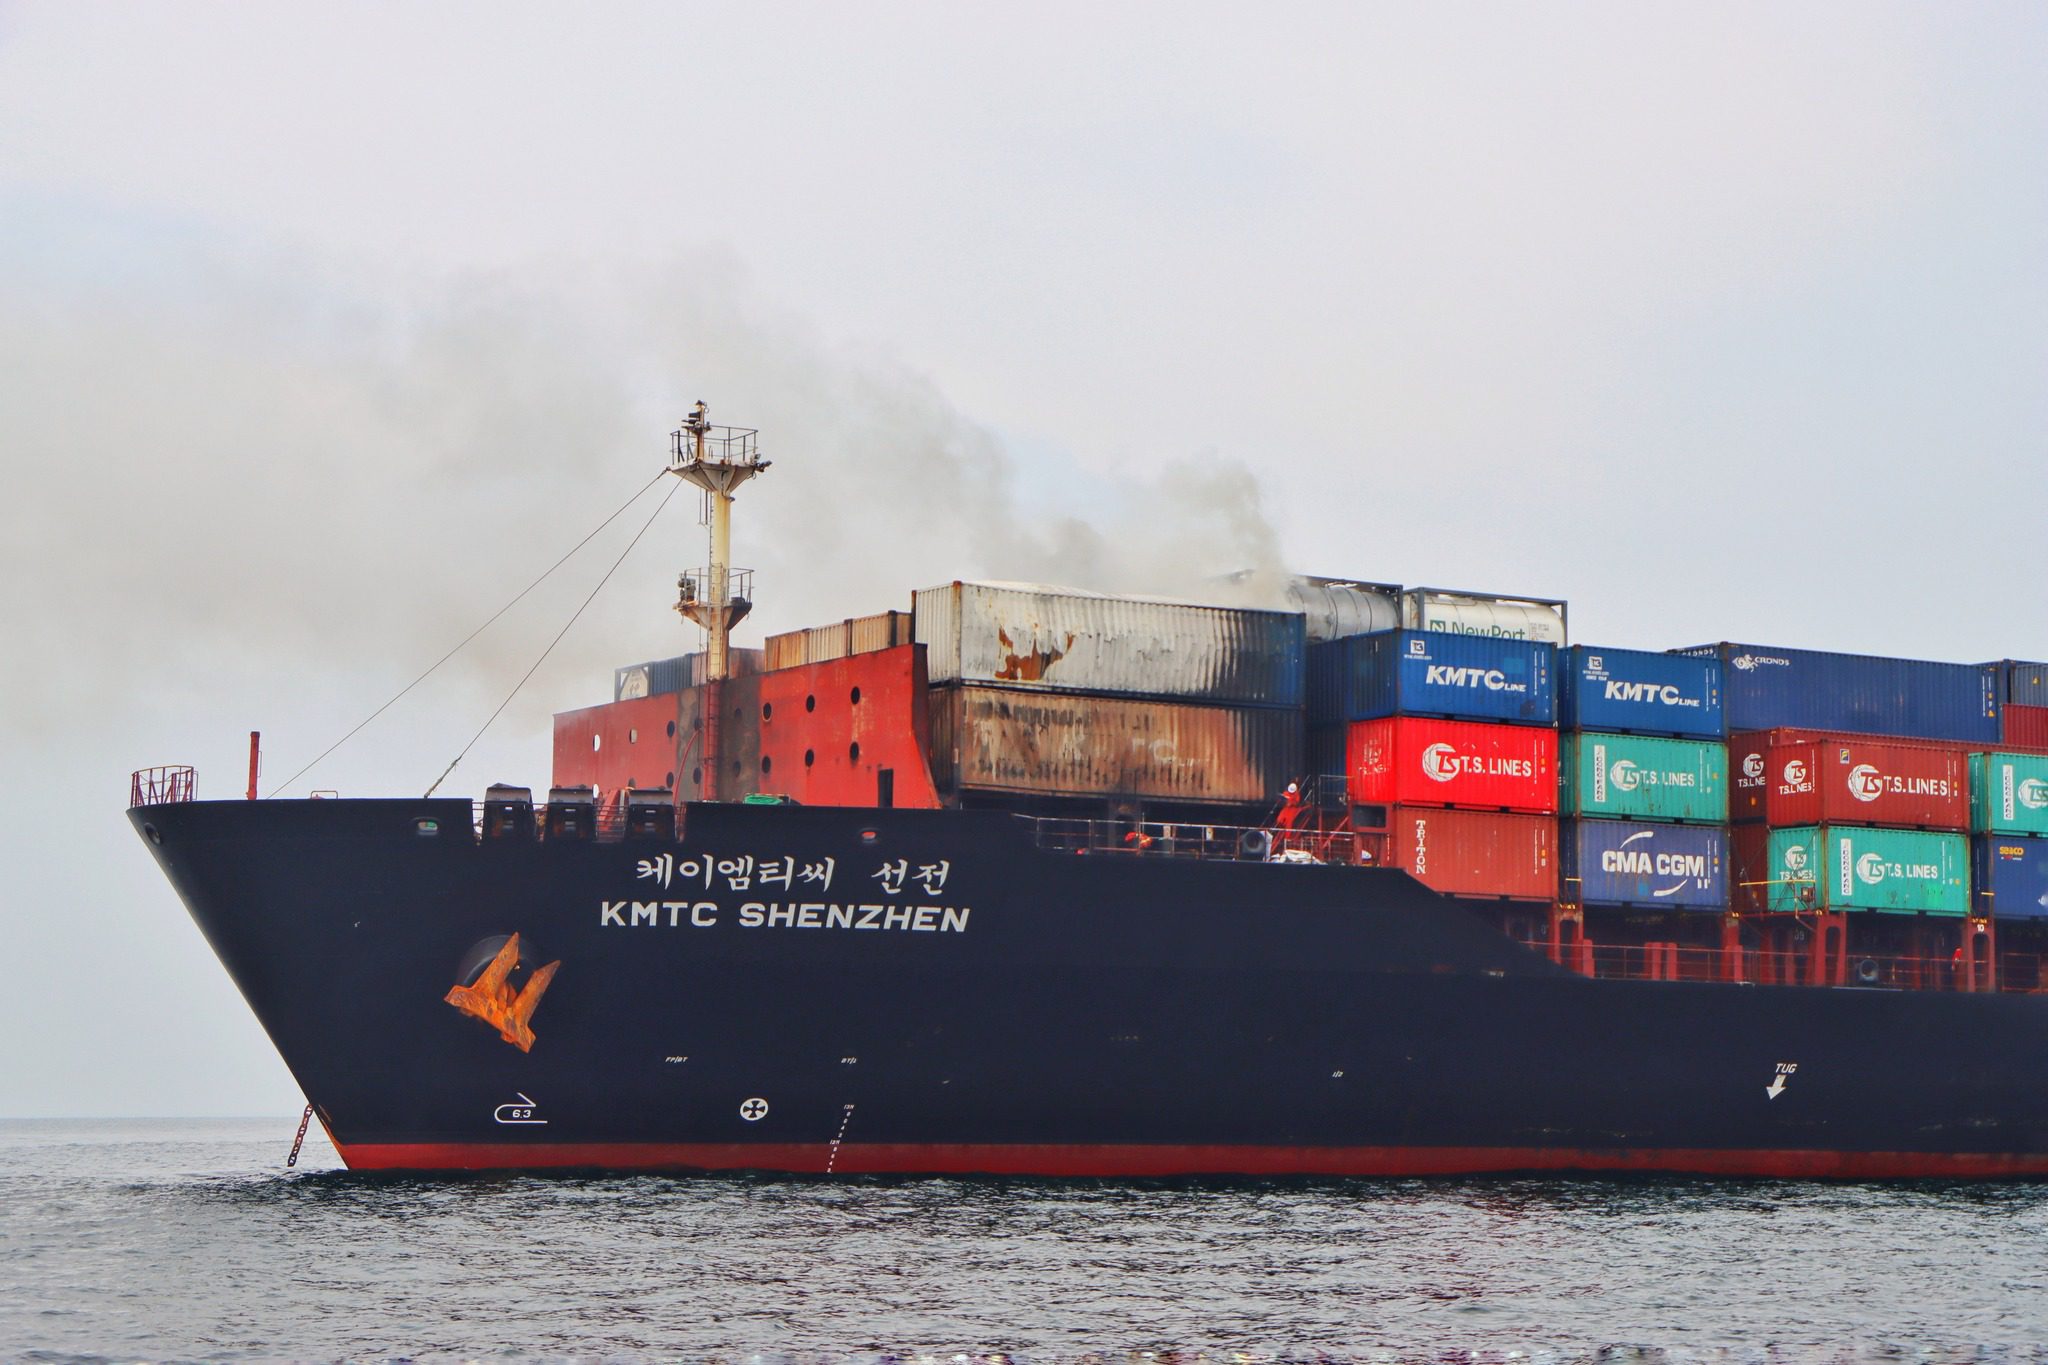 Burned containers on the bow of the KMTC Shenzen containership